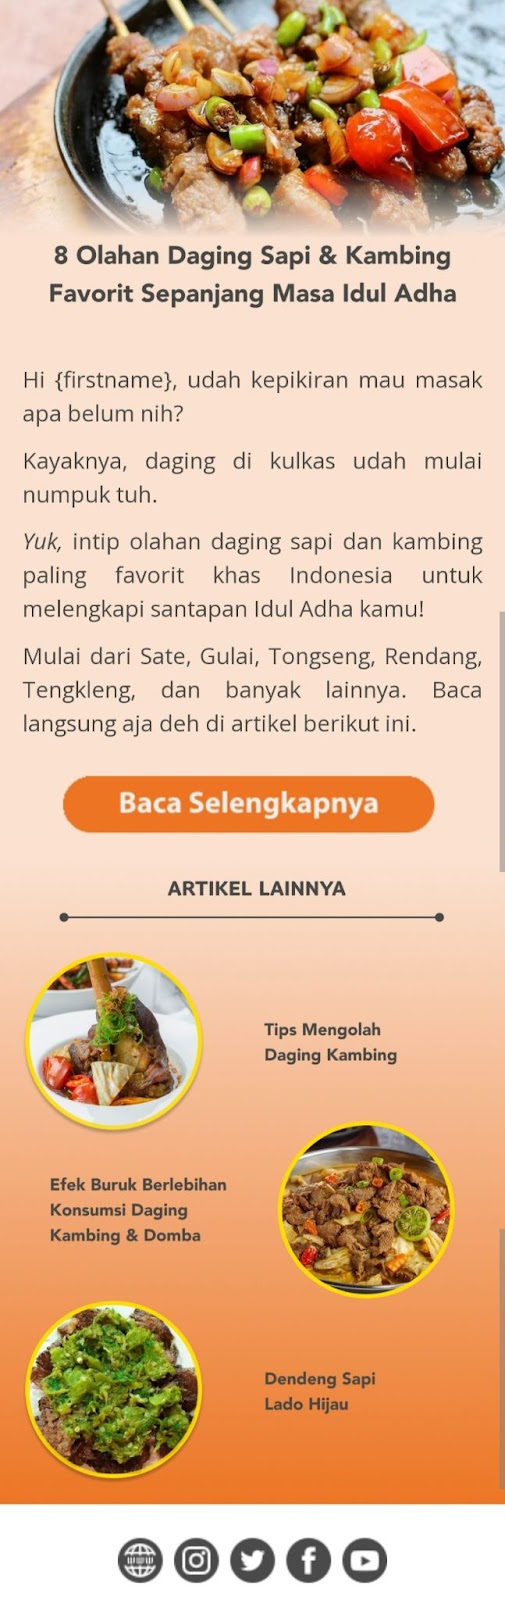 Contoh Newsletter Email YukMakan